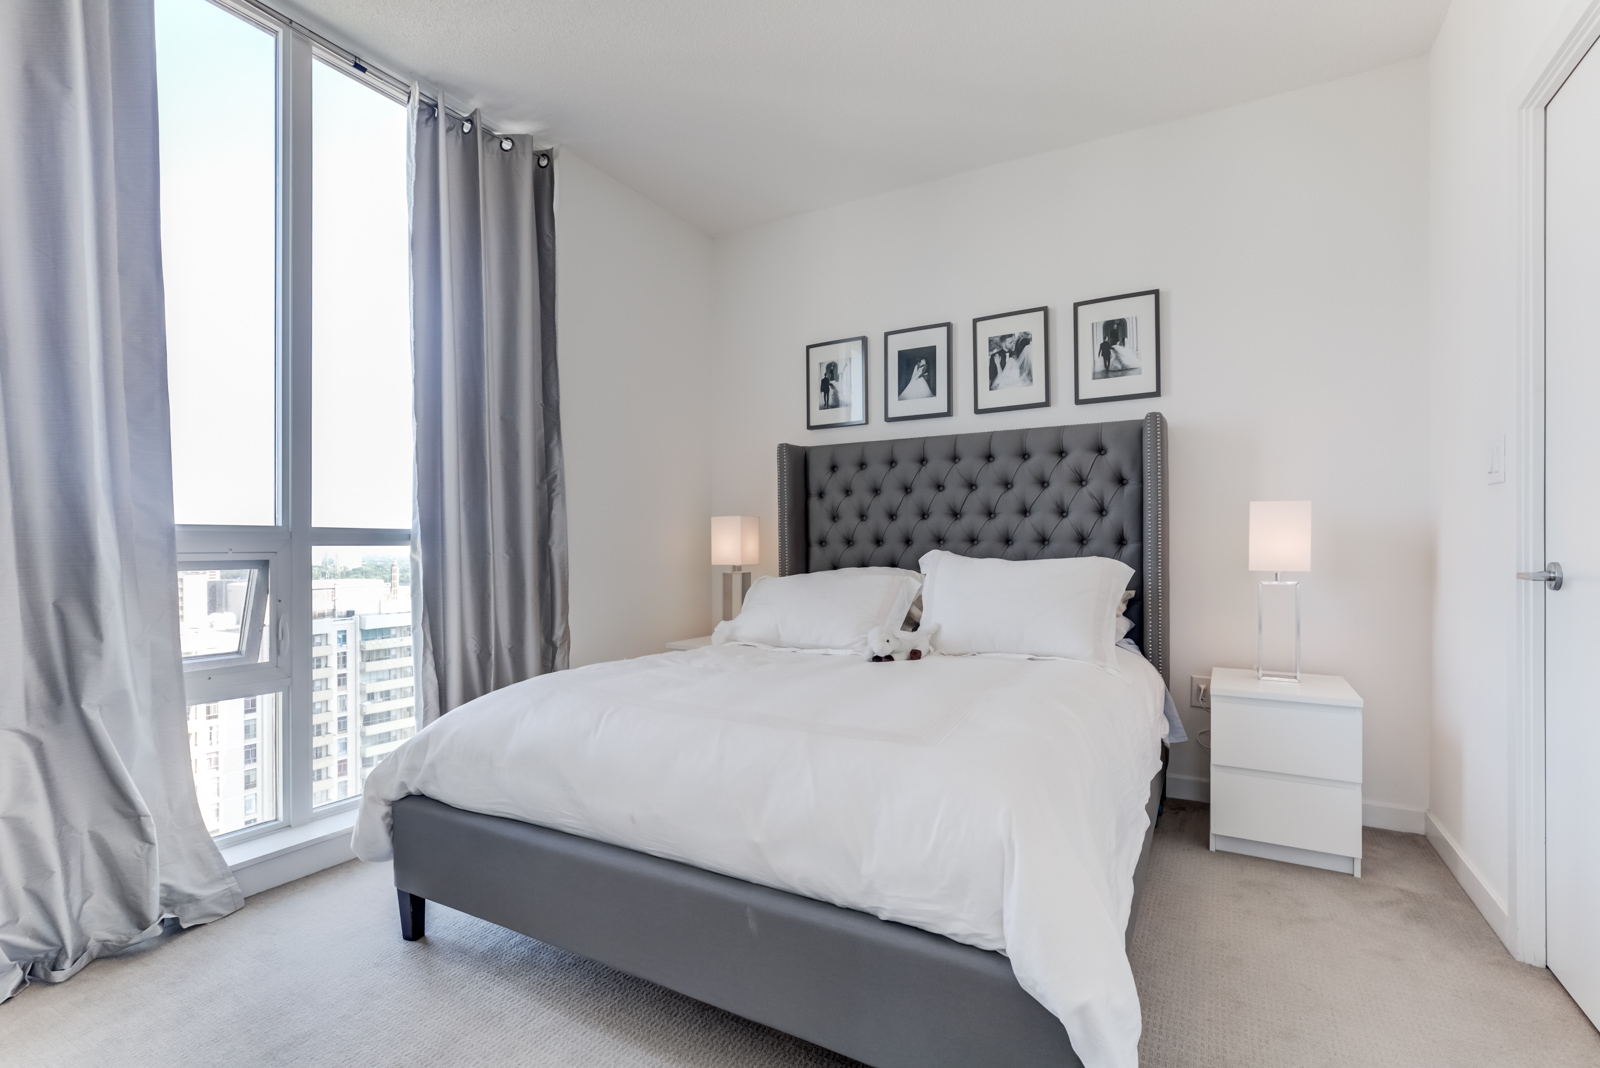 Master bedroom and queen-sized bed with black headboard and white sheets plus broadloom carpeting.